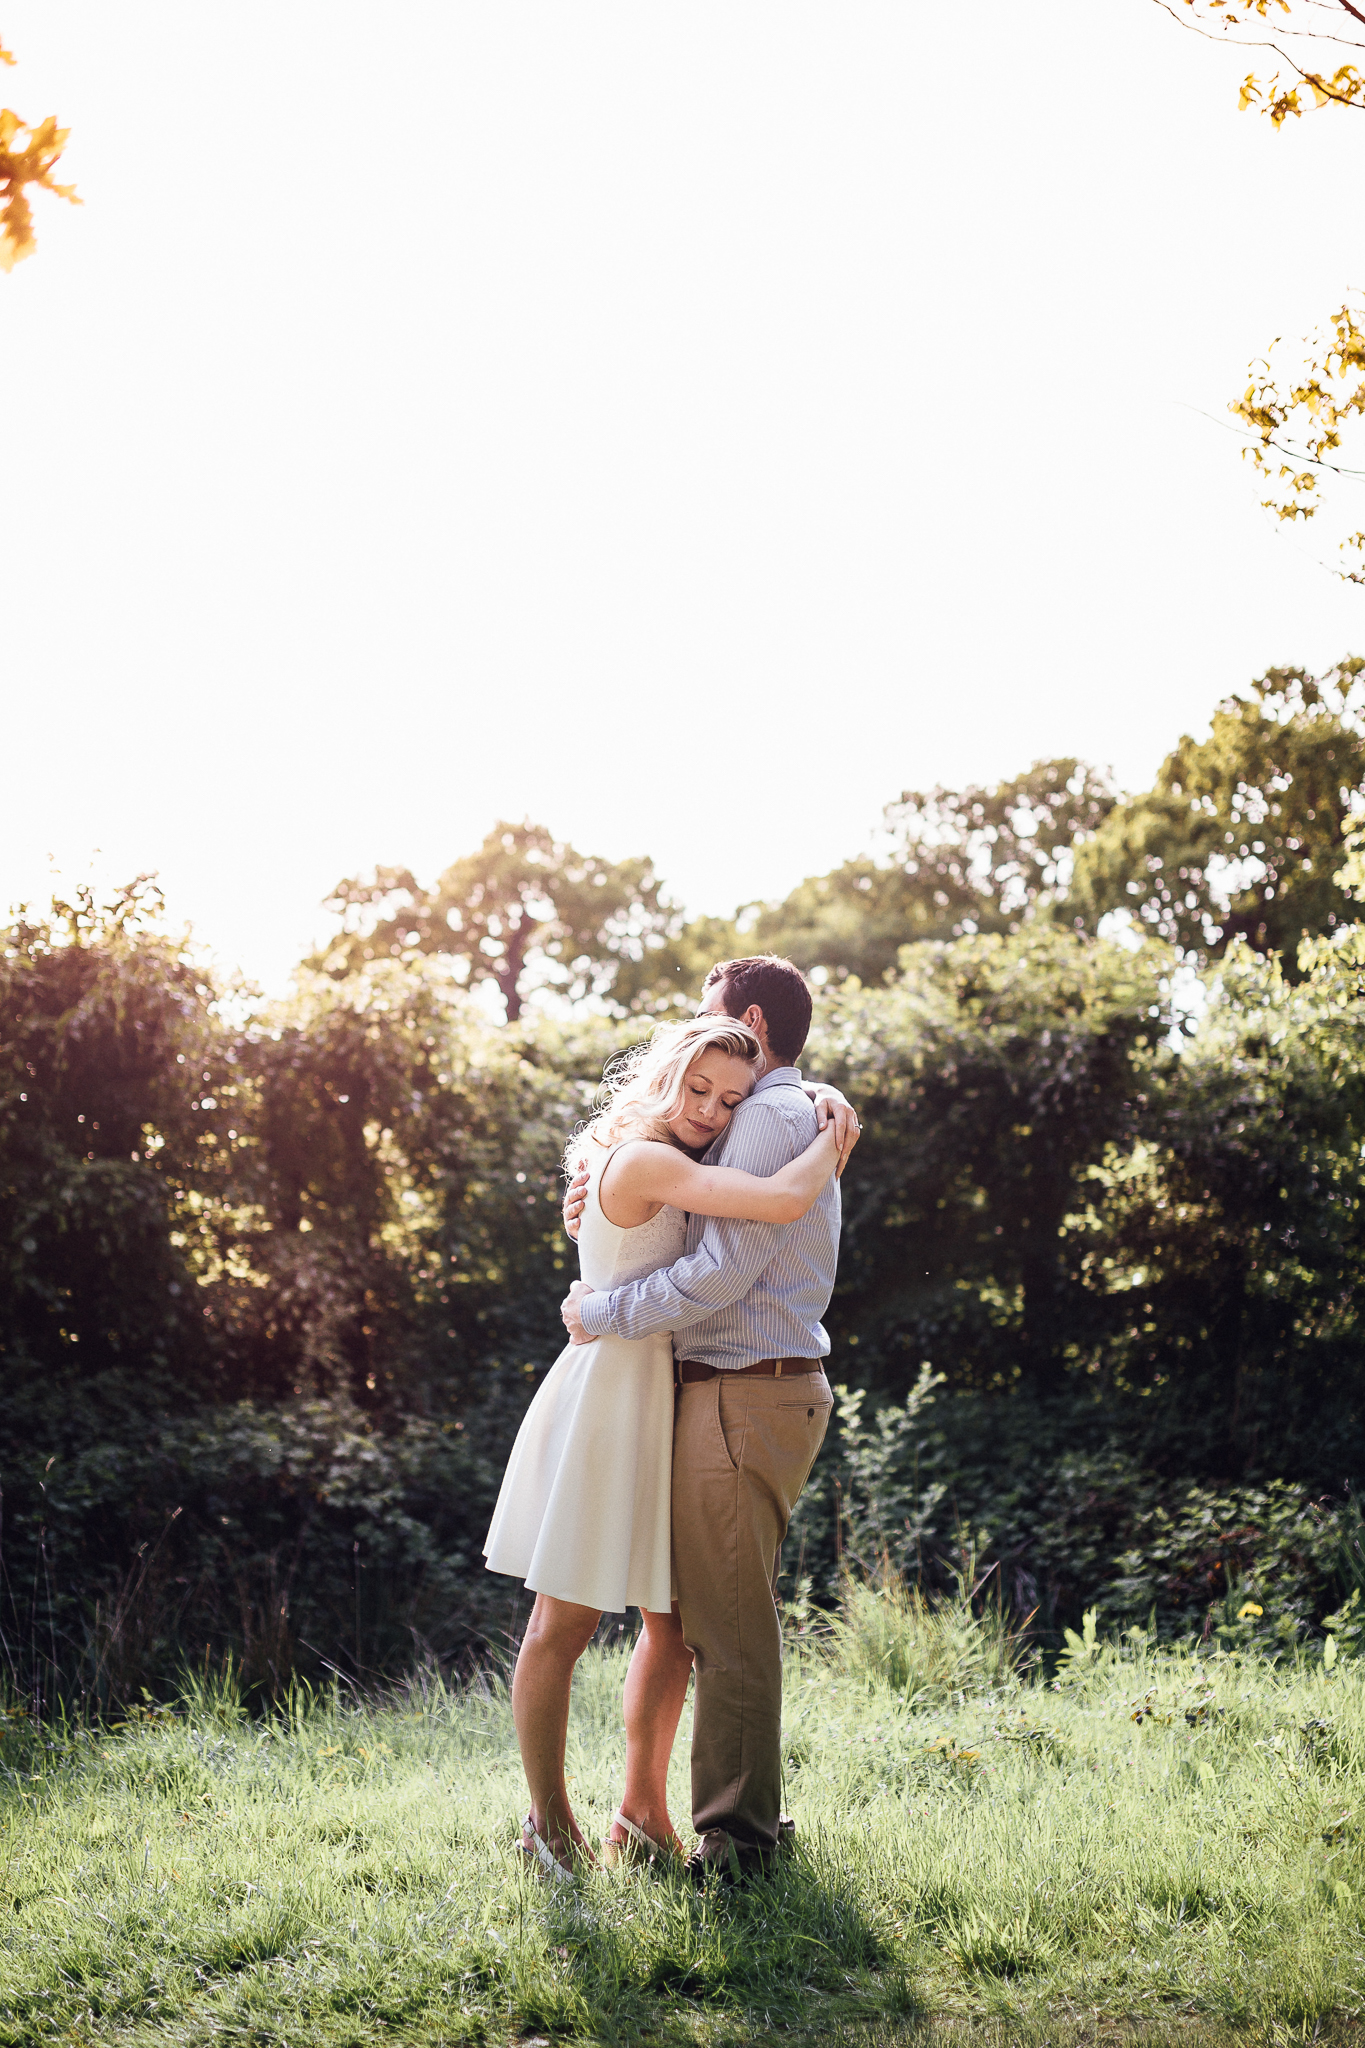 sunset engagement shoot at richmond park in the summer